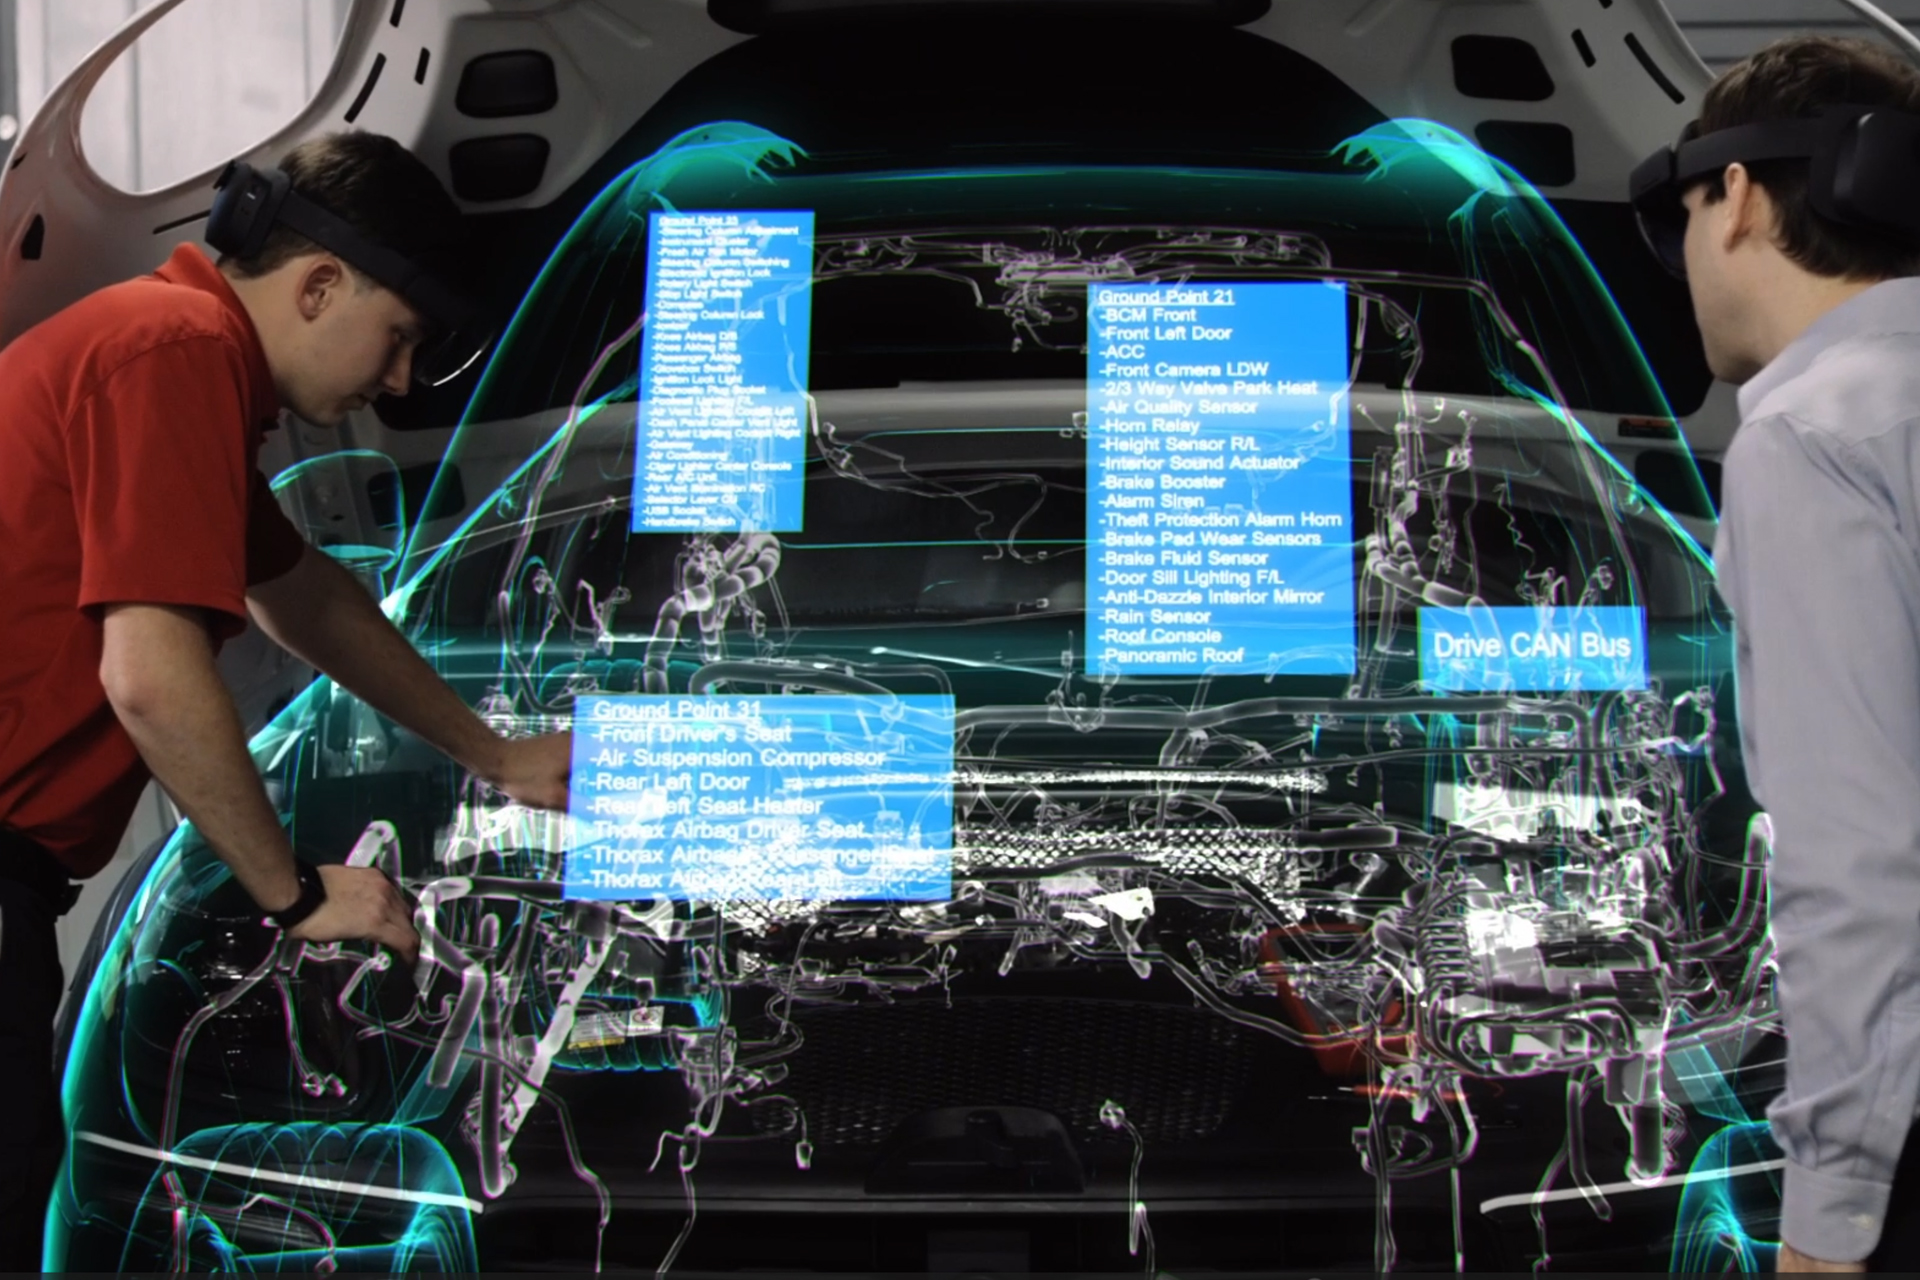 Two men wearing HoloLens devices as they look into the engine compartment of a car, along with elements showing what they see on their devices